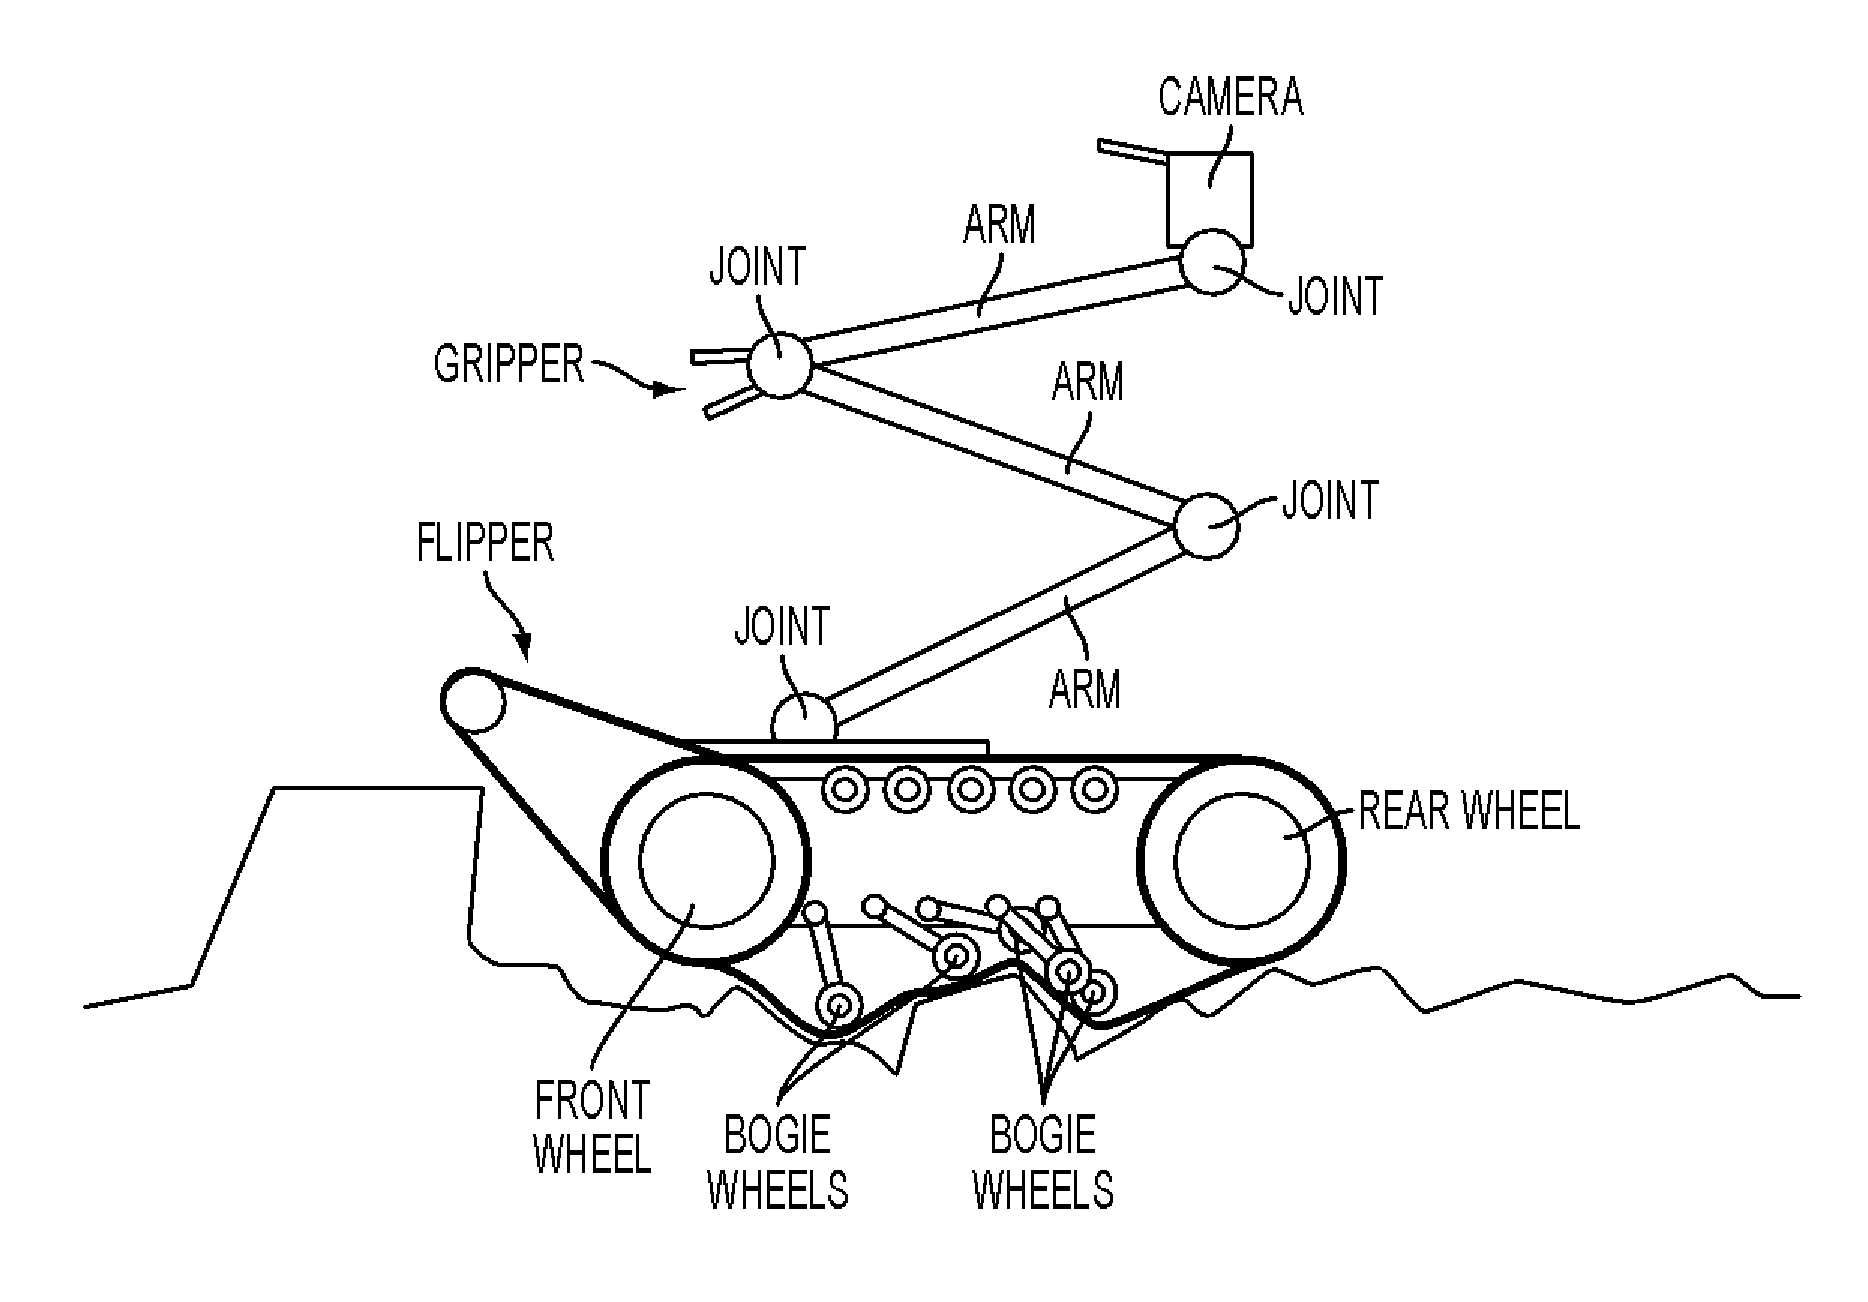 Biologically inspired compliant locomotion for remote vehicles